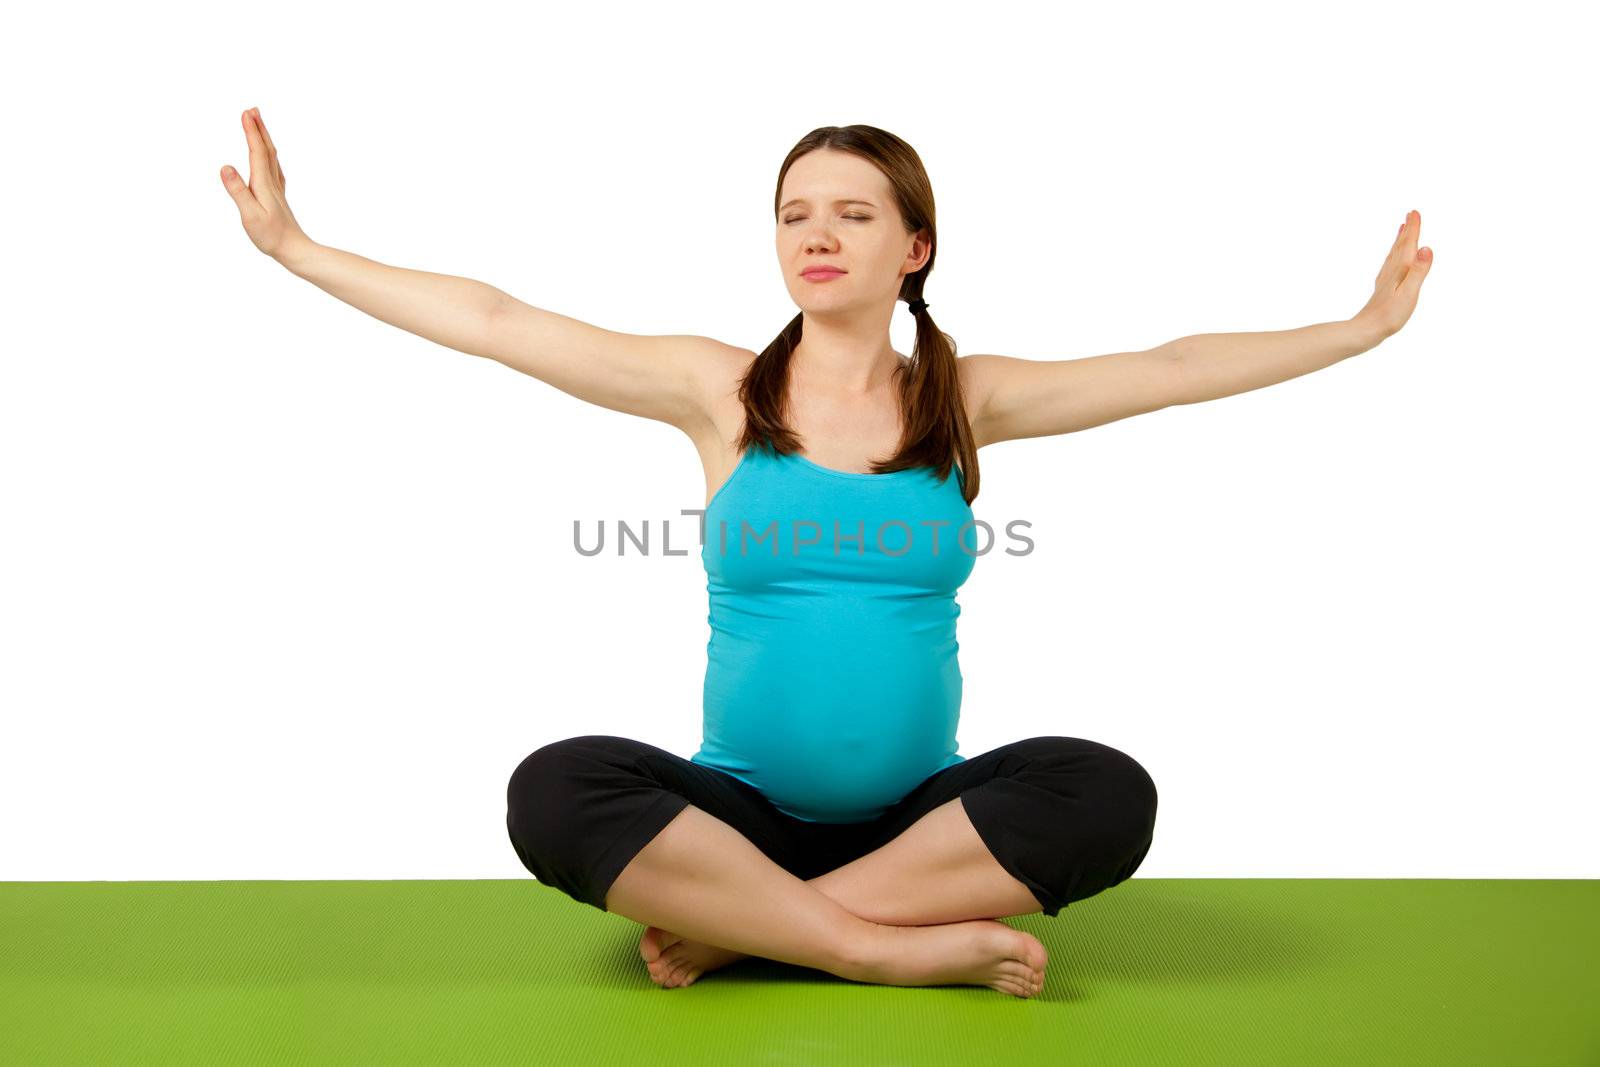 Pregnant young women stretching and exercising on the green yoga mat. 37 weeks.